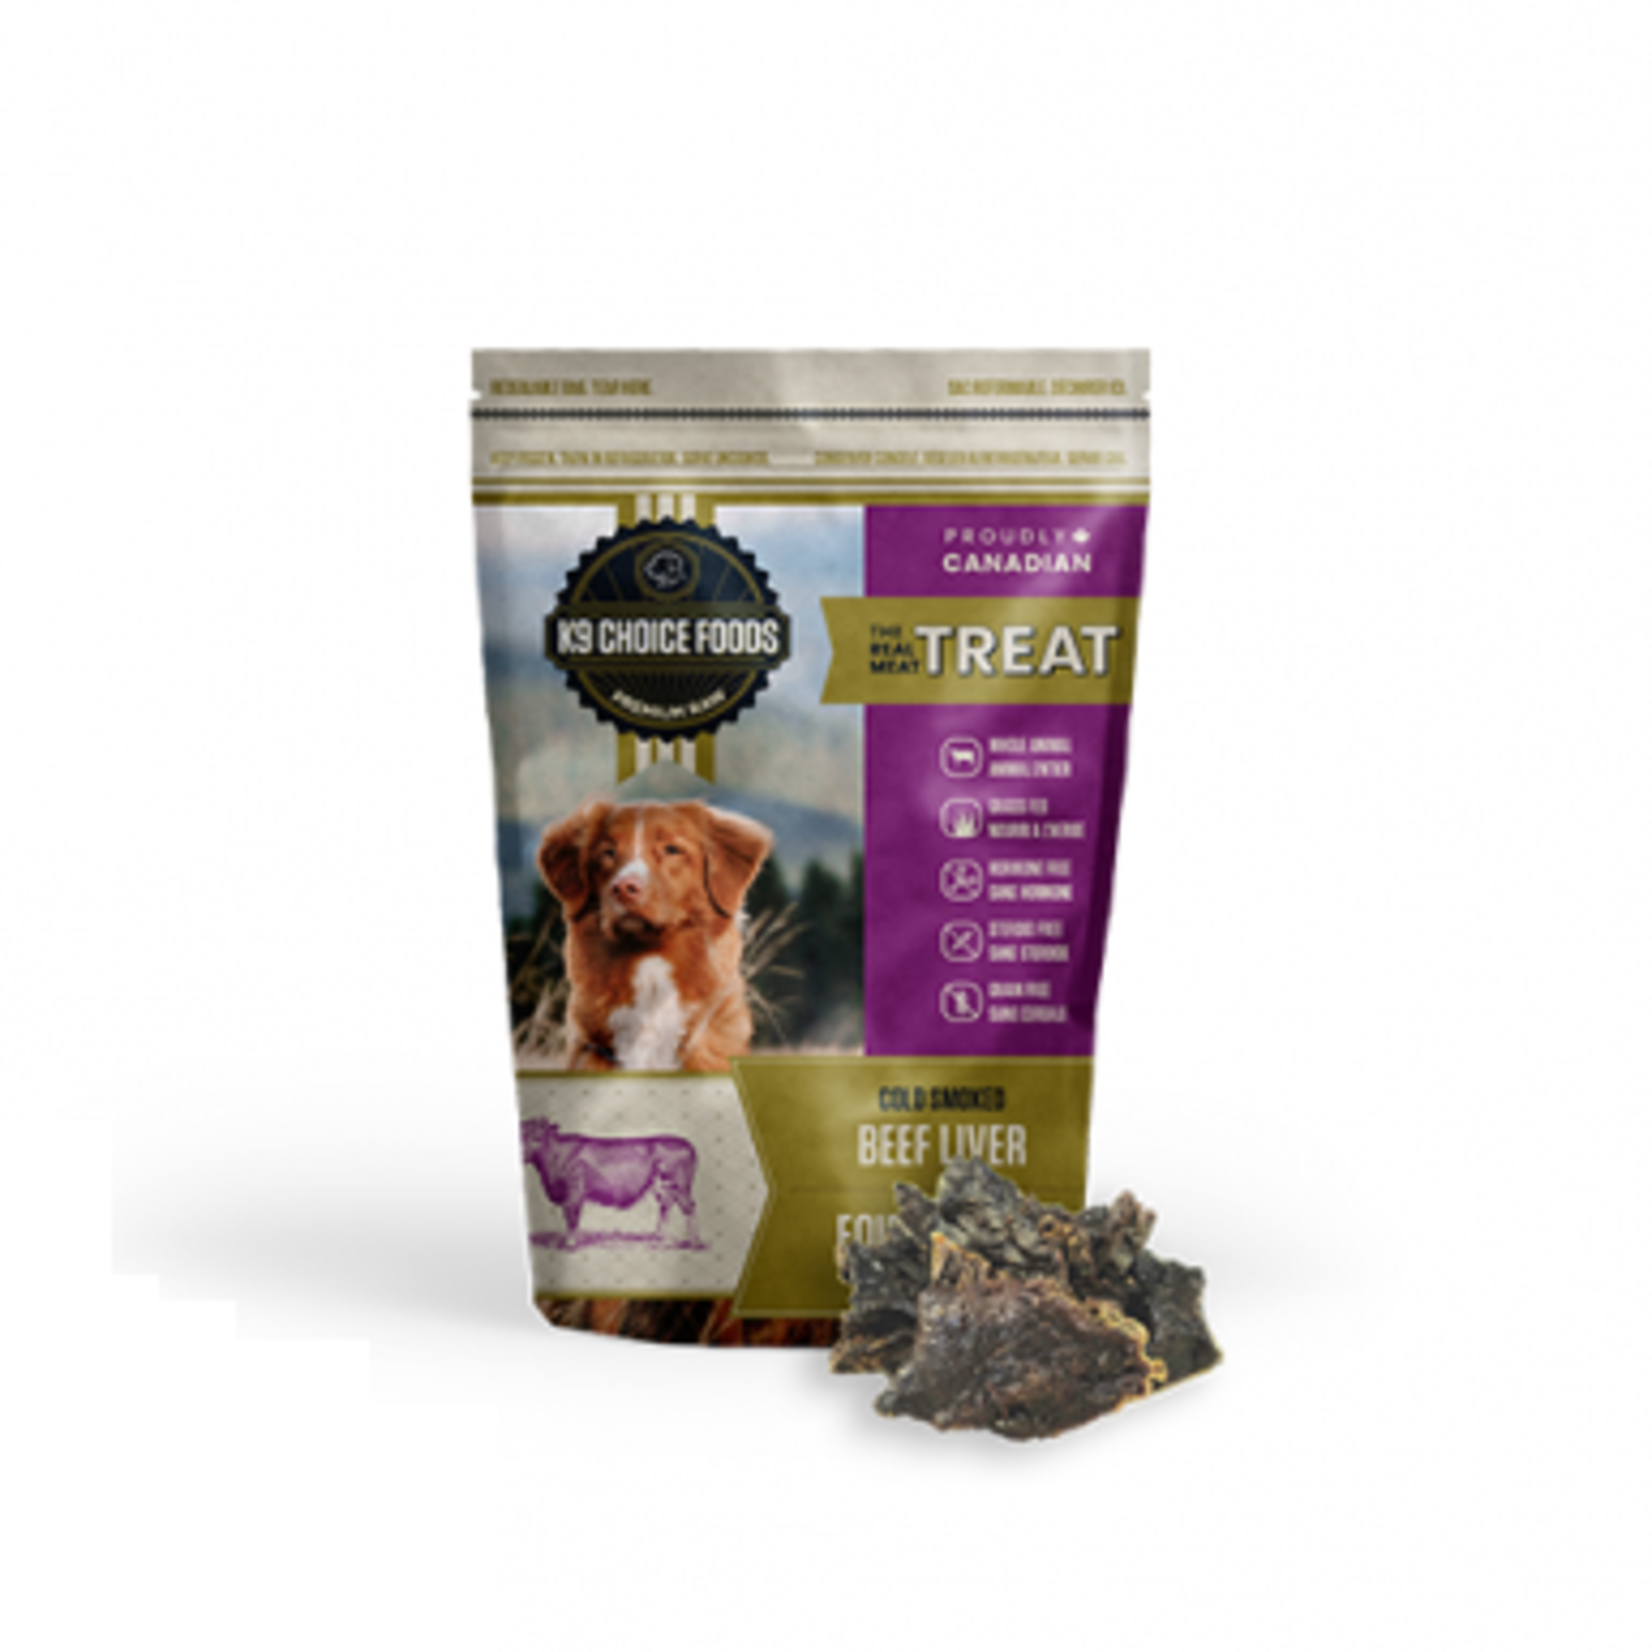 K9 Choice Real Meat Treats - Cold Smoked Liver - Frozen - For dogs